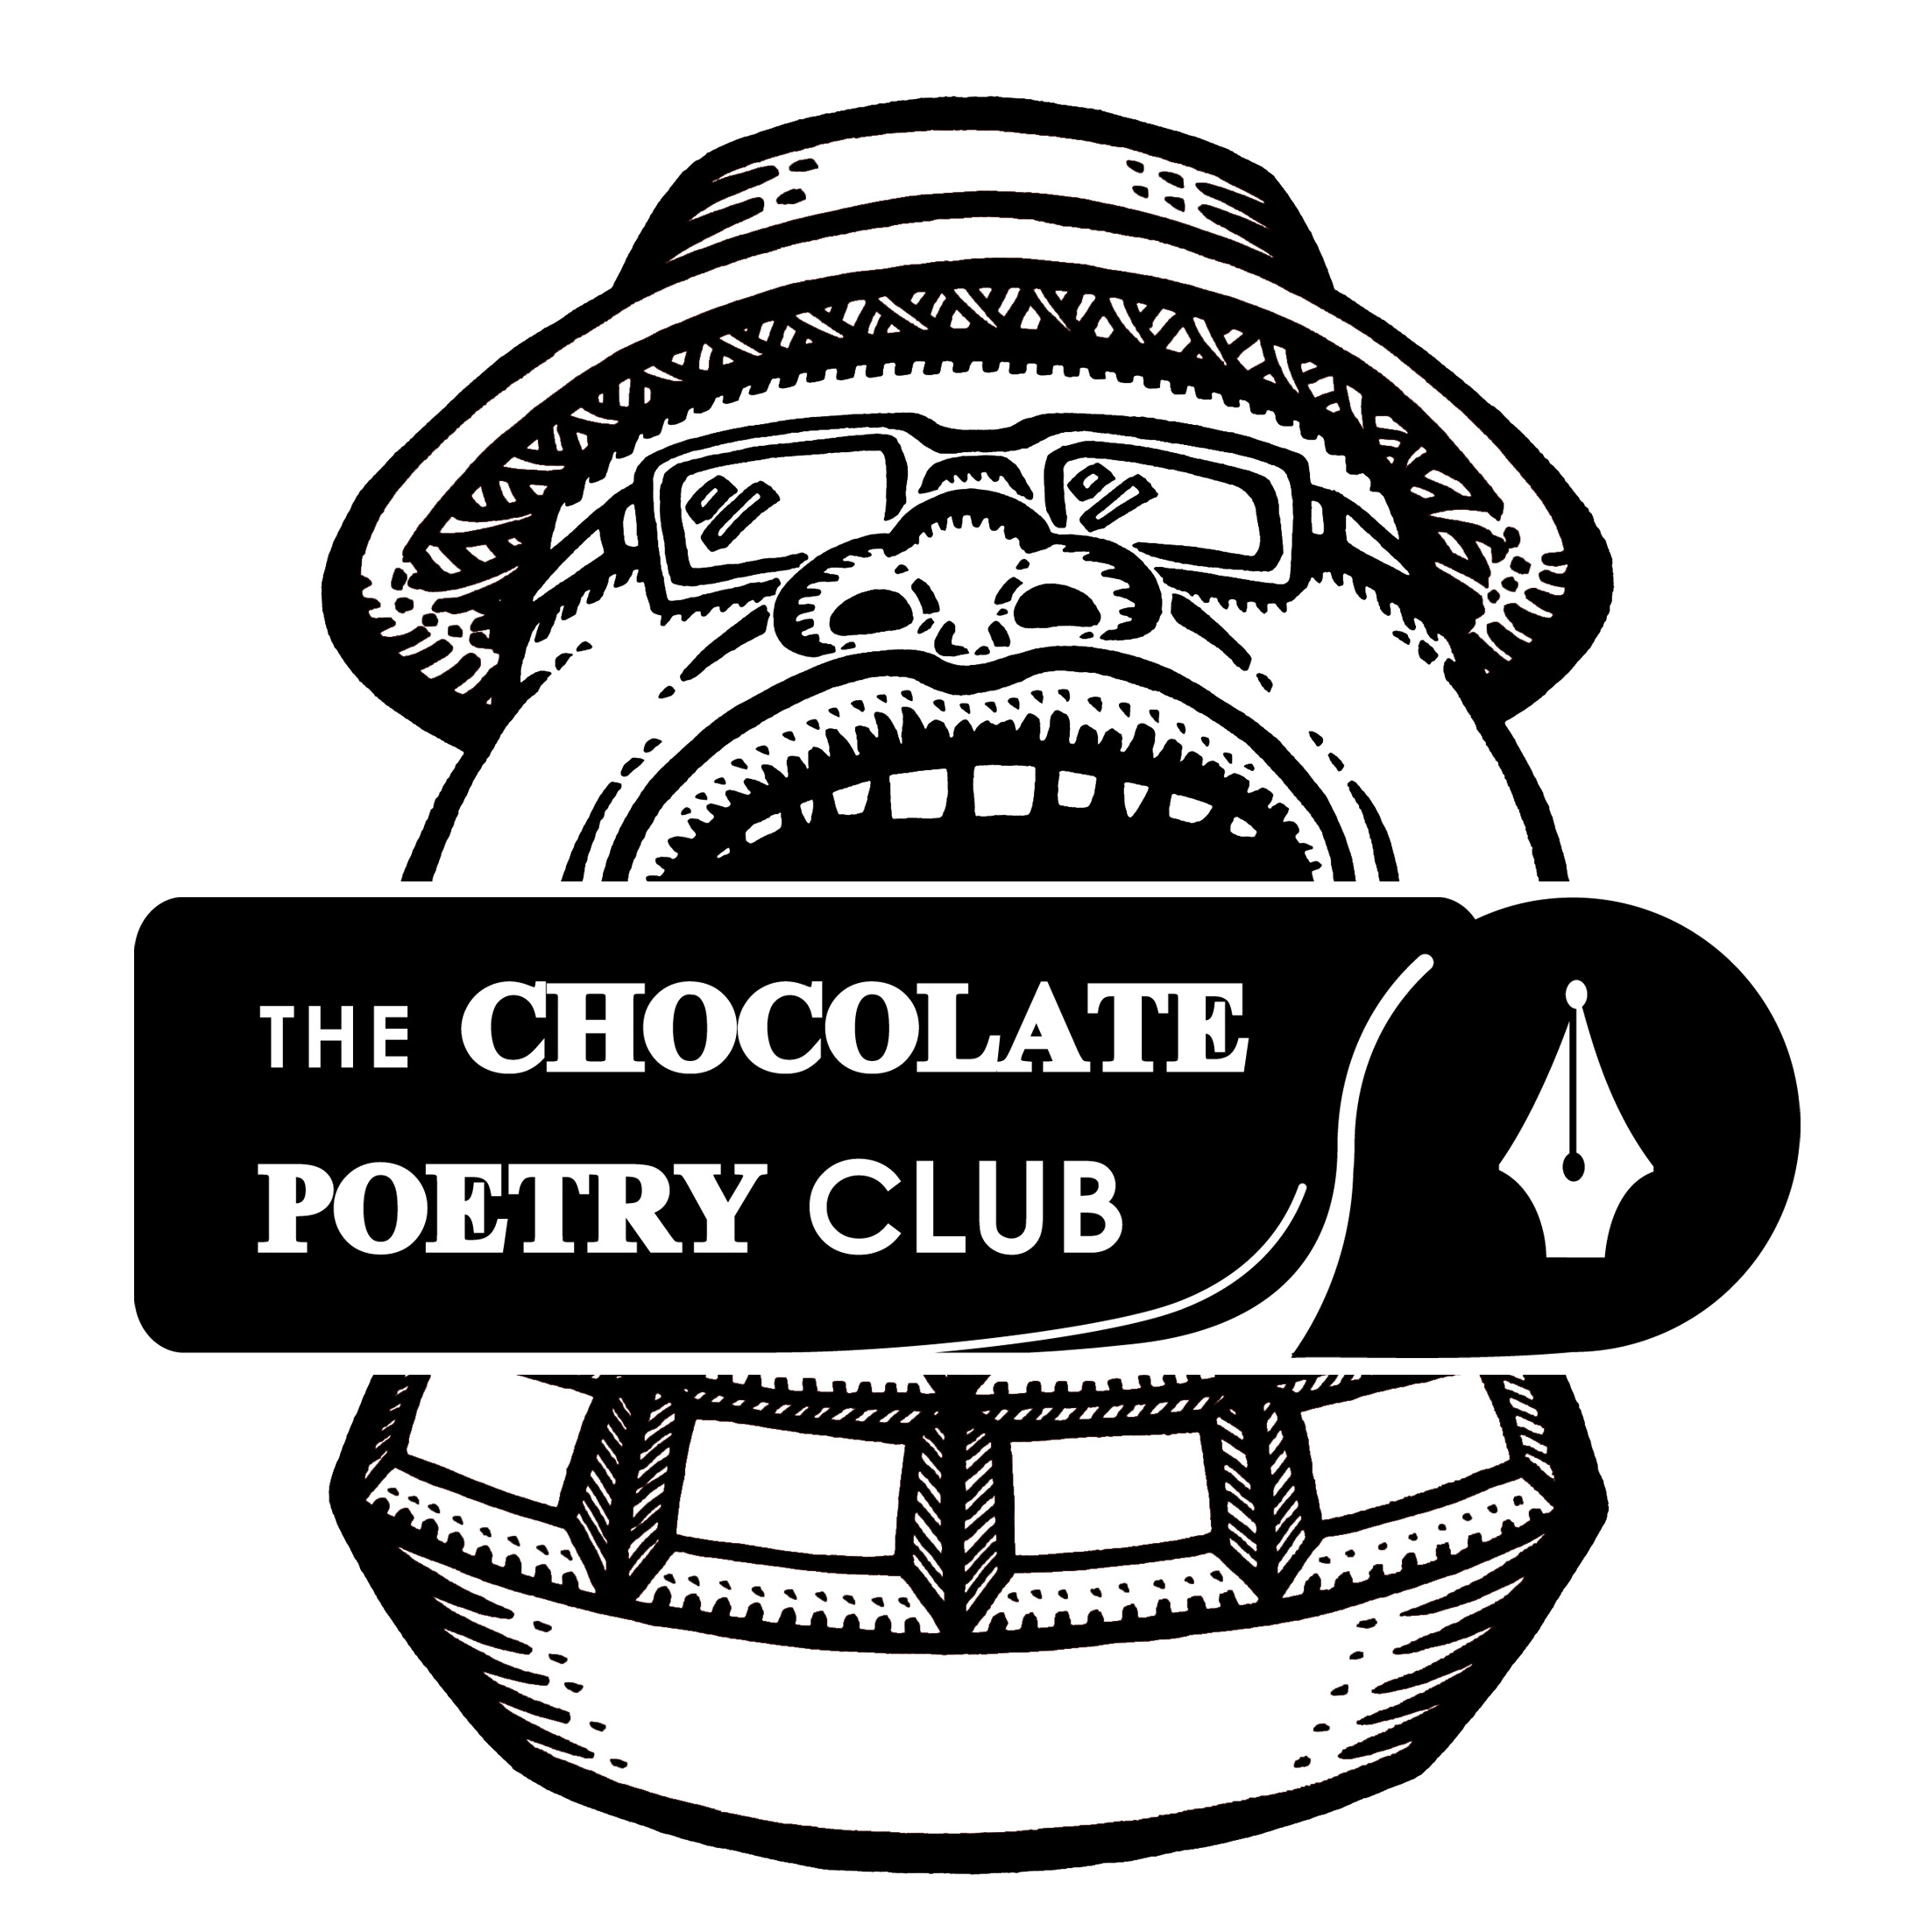 The Chocolate Poetry Club